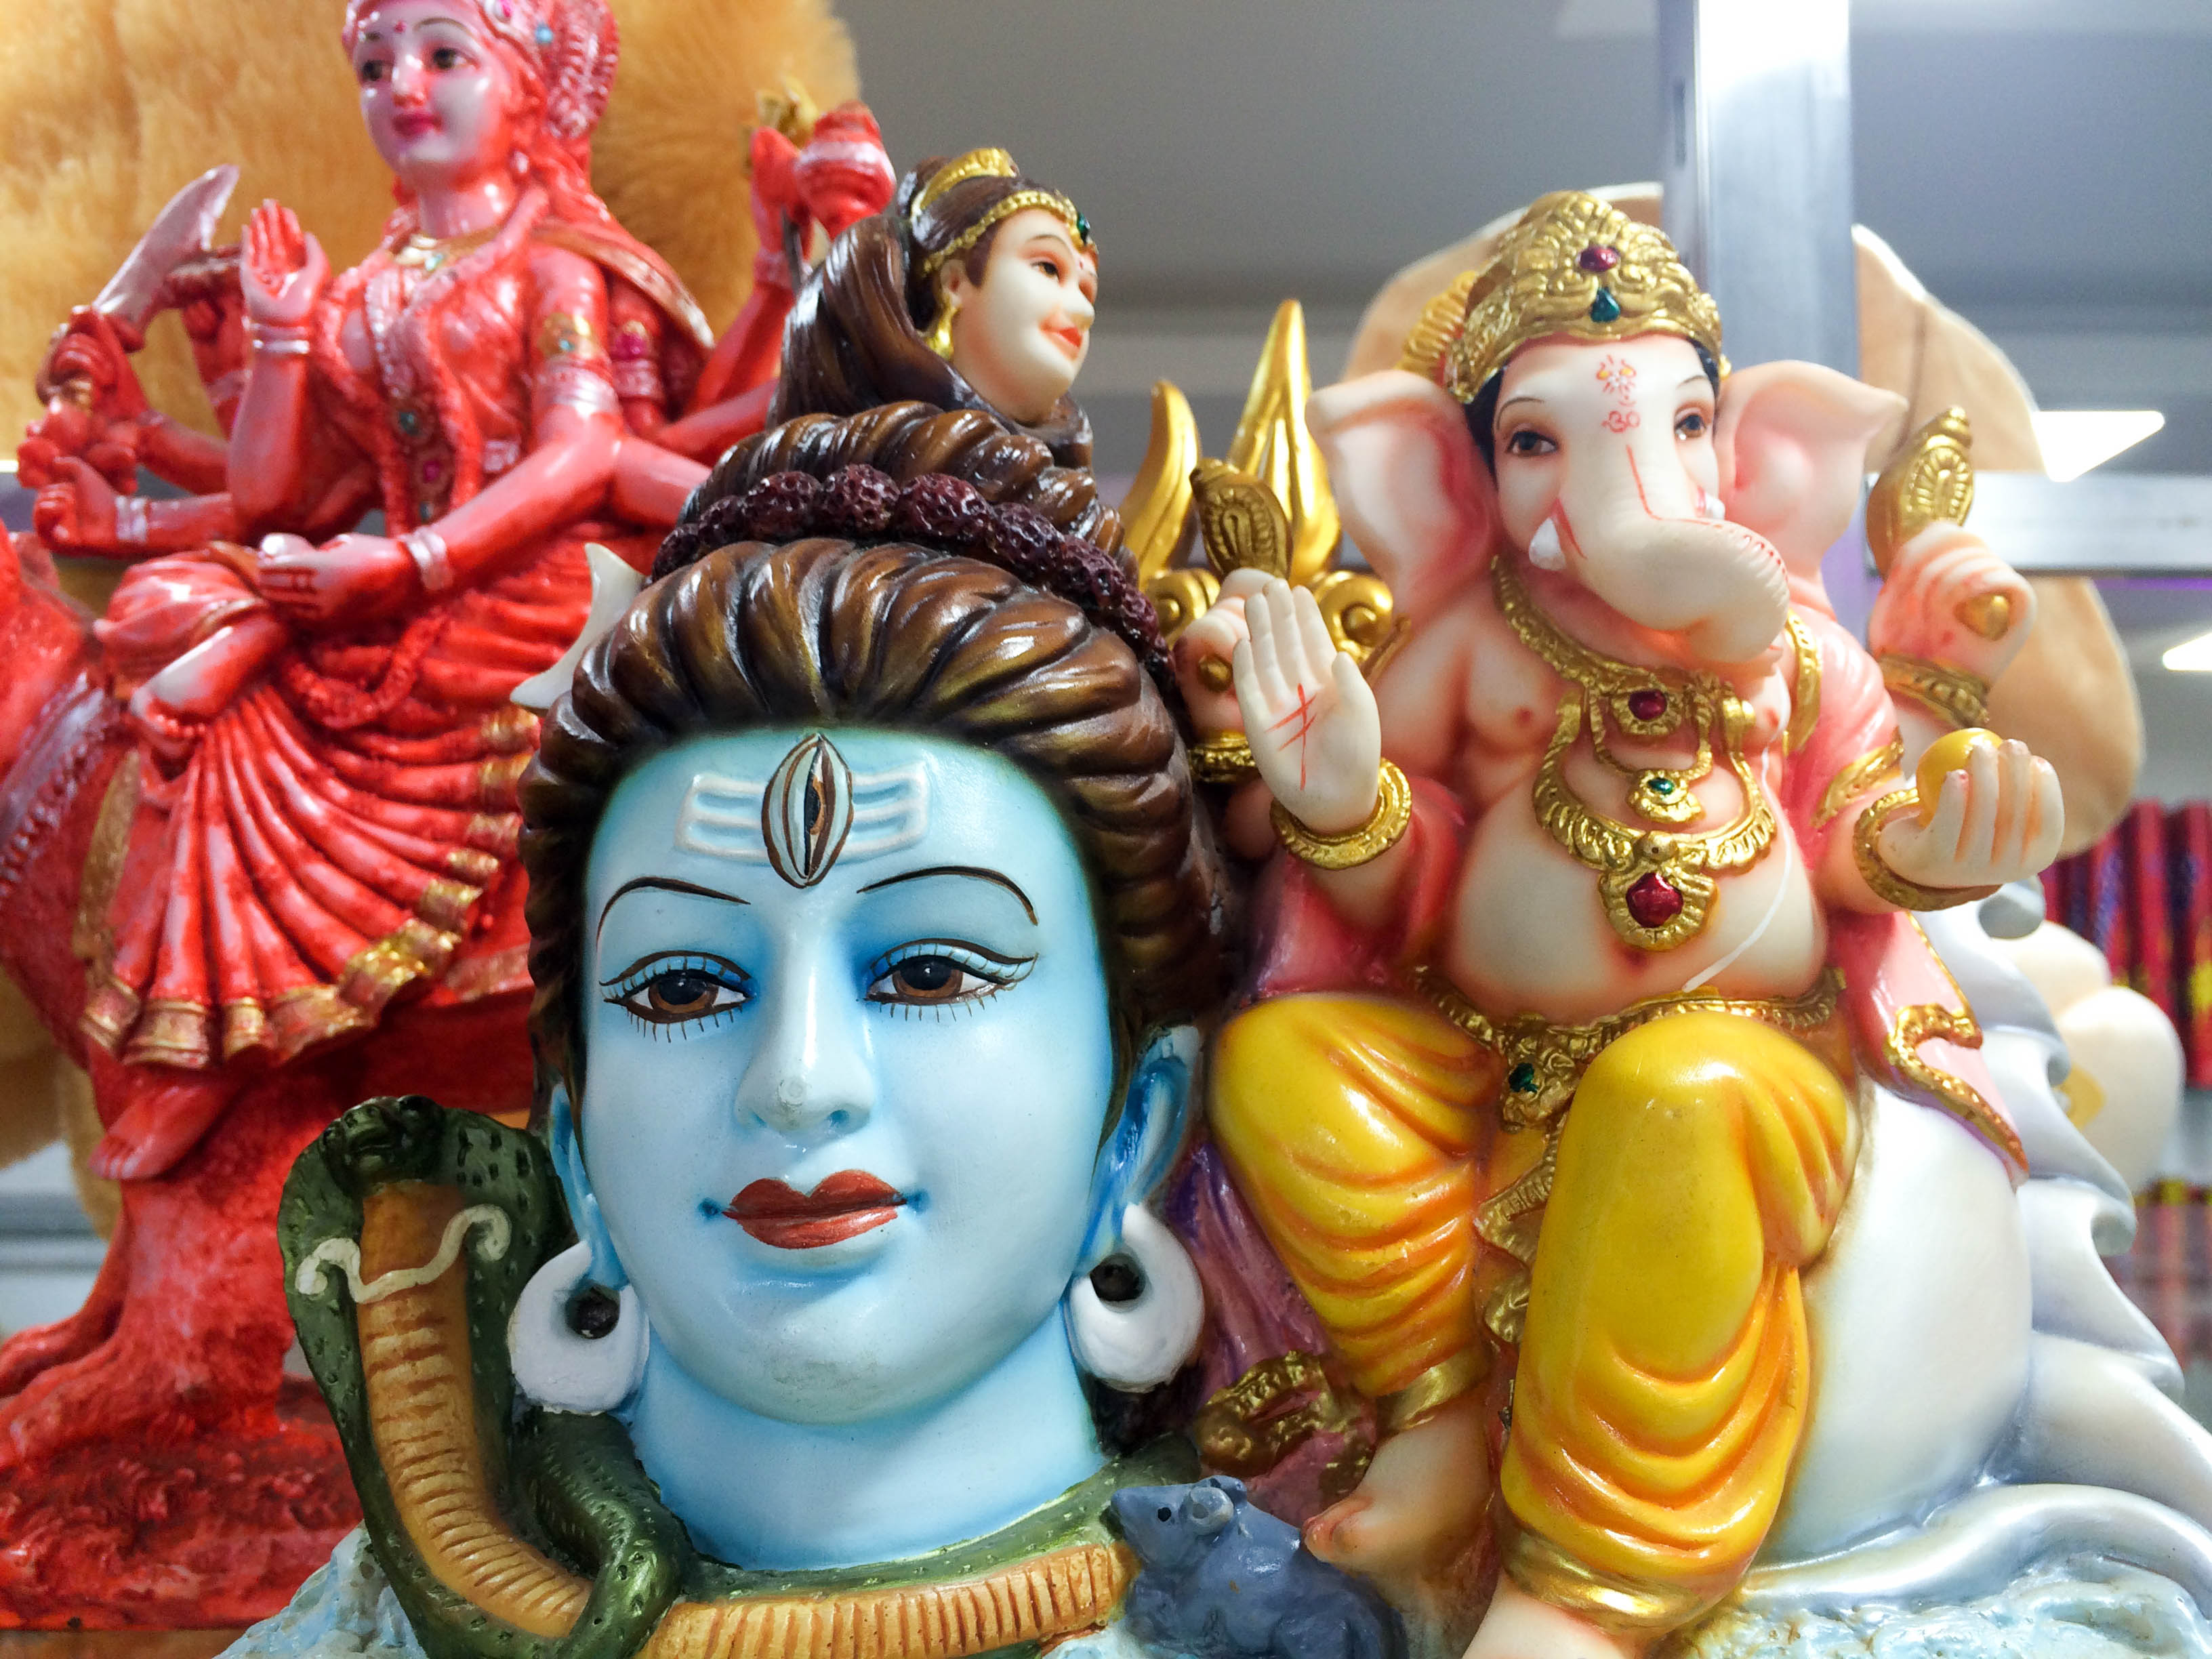 File Shiva Parvati Ganesha Images A Statuette Representing Lord Ganesh And His Father Lord Shiva Jpg Wikimedia Commons